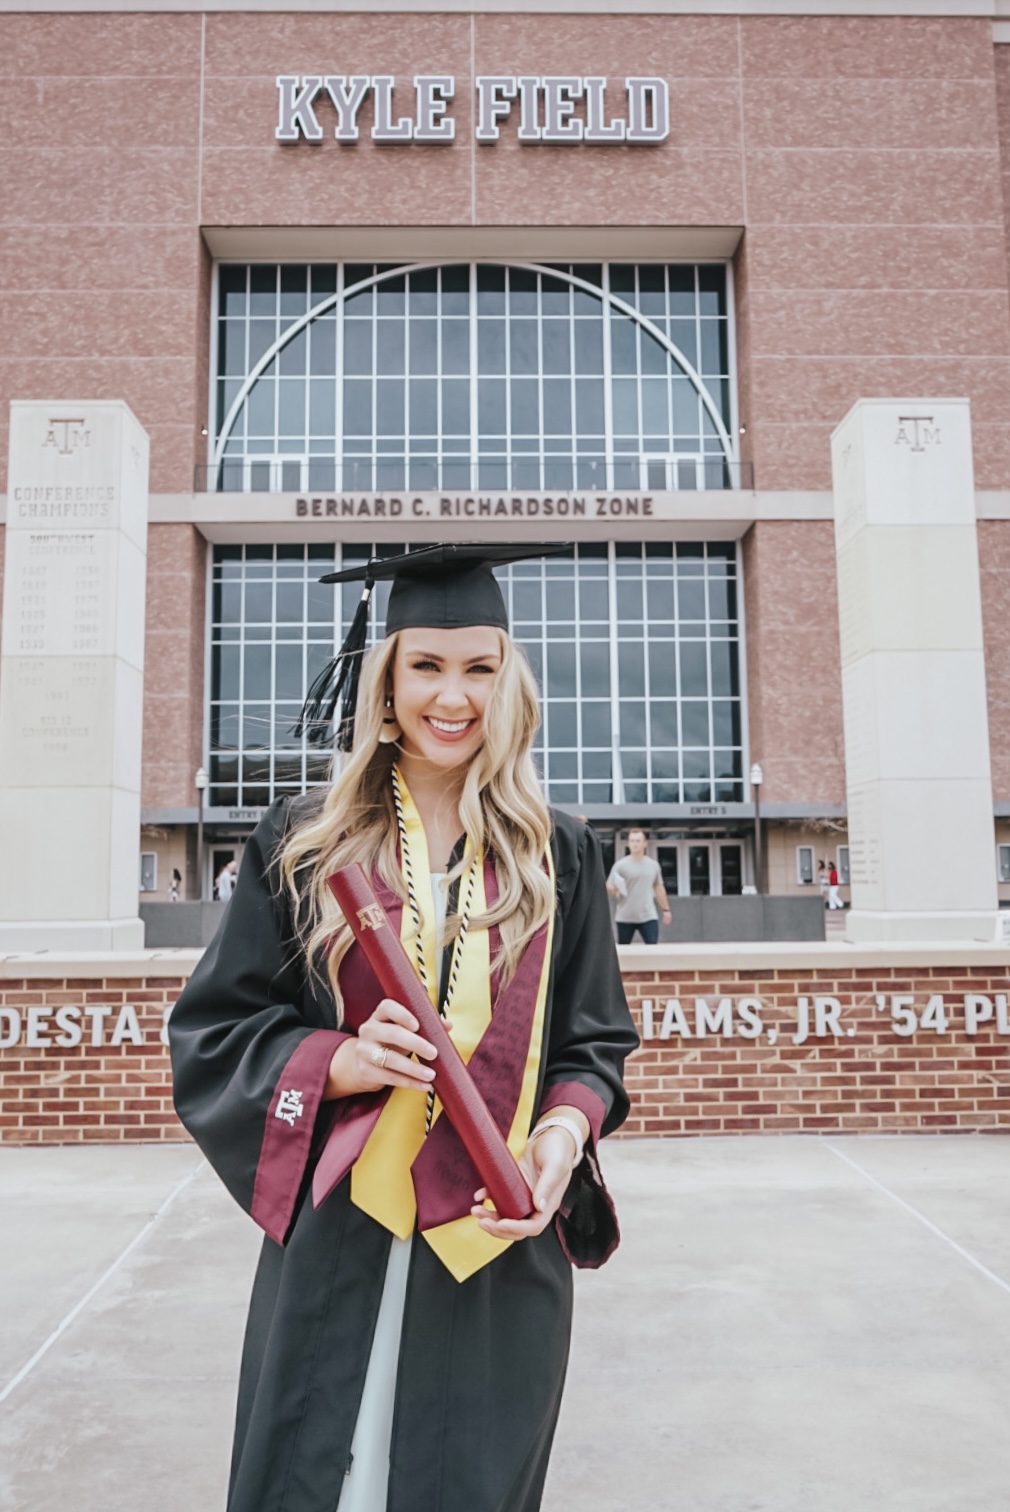 Fuller in cap and gown in front of Kyle Field.